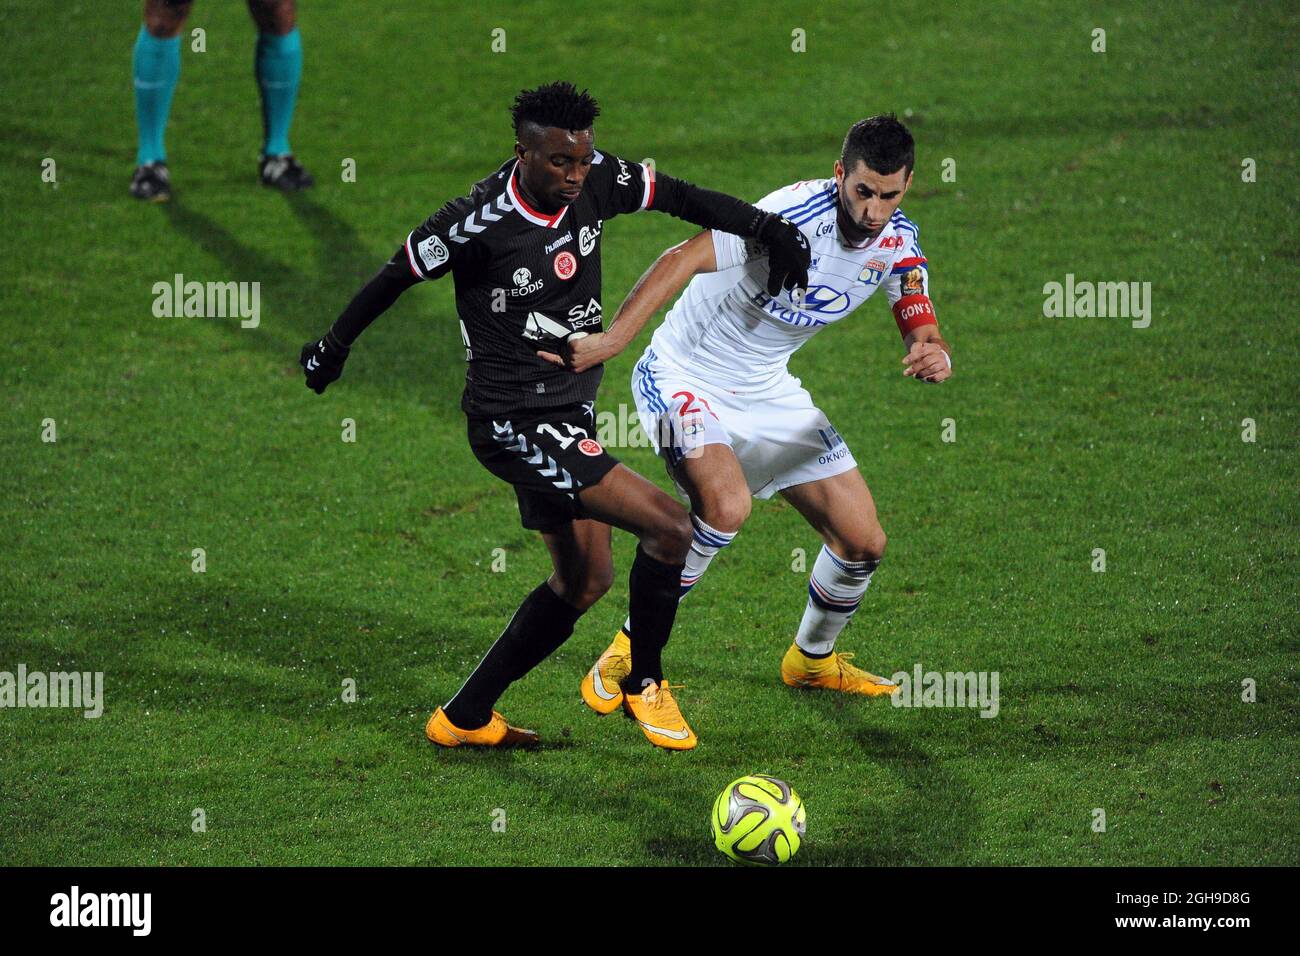 Benjamin Moukandjo and Maxime Gonalons tackles during Ligue 1 match between Stade de Reims and Lyon at the Stade de Gerland in France on December 04, 2014. Stock Photo